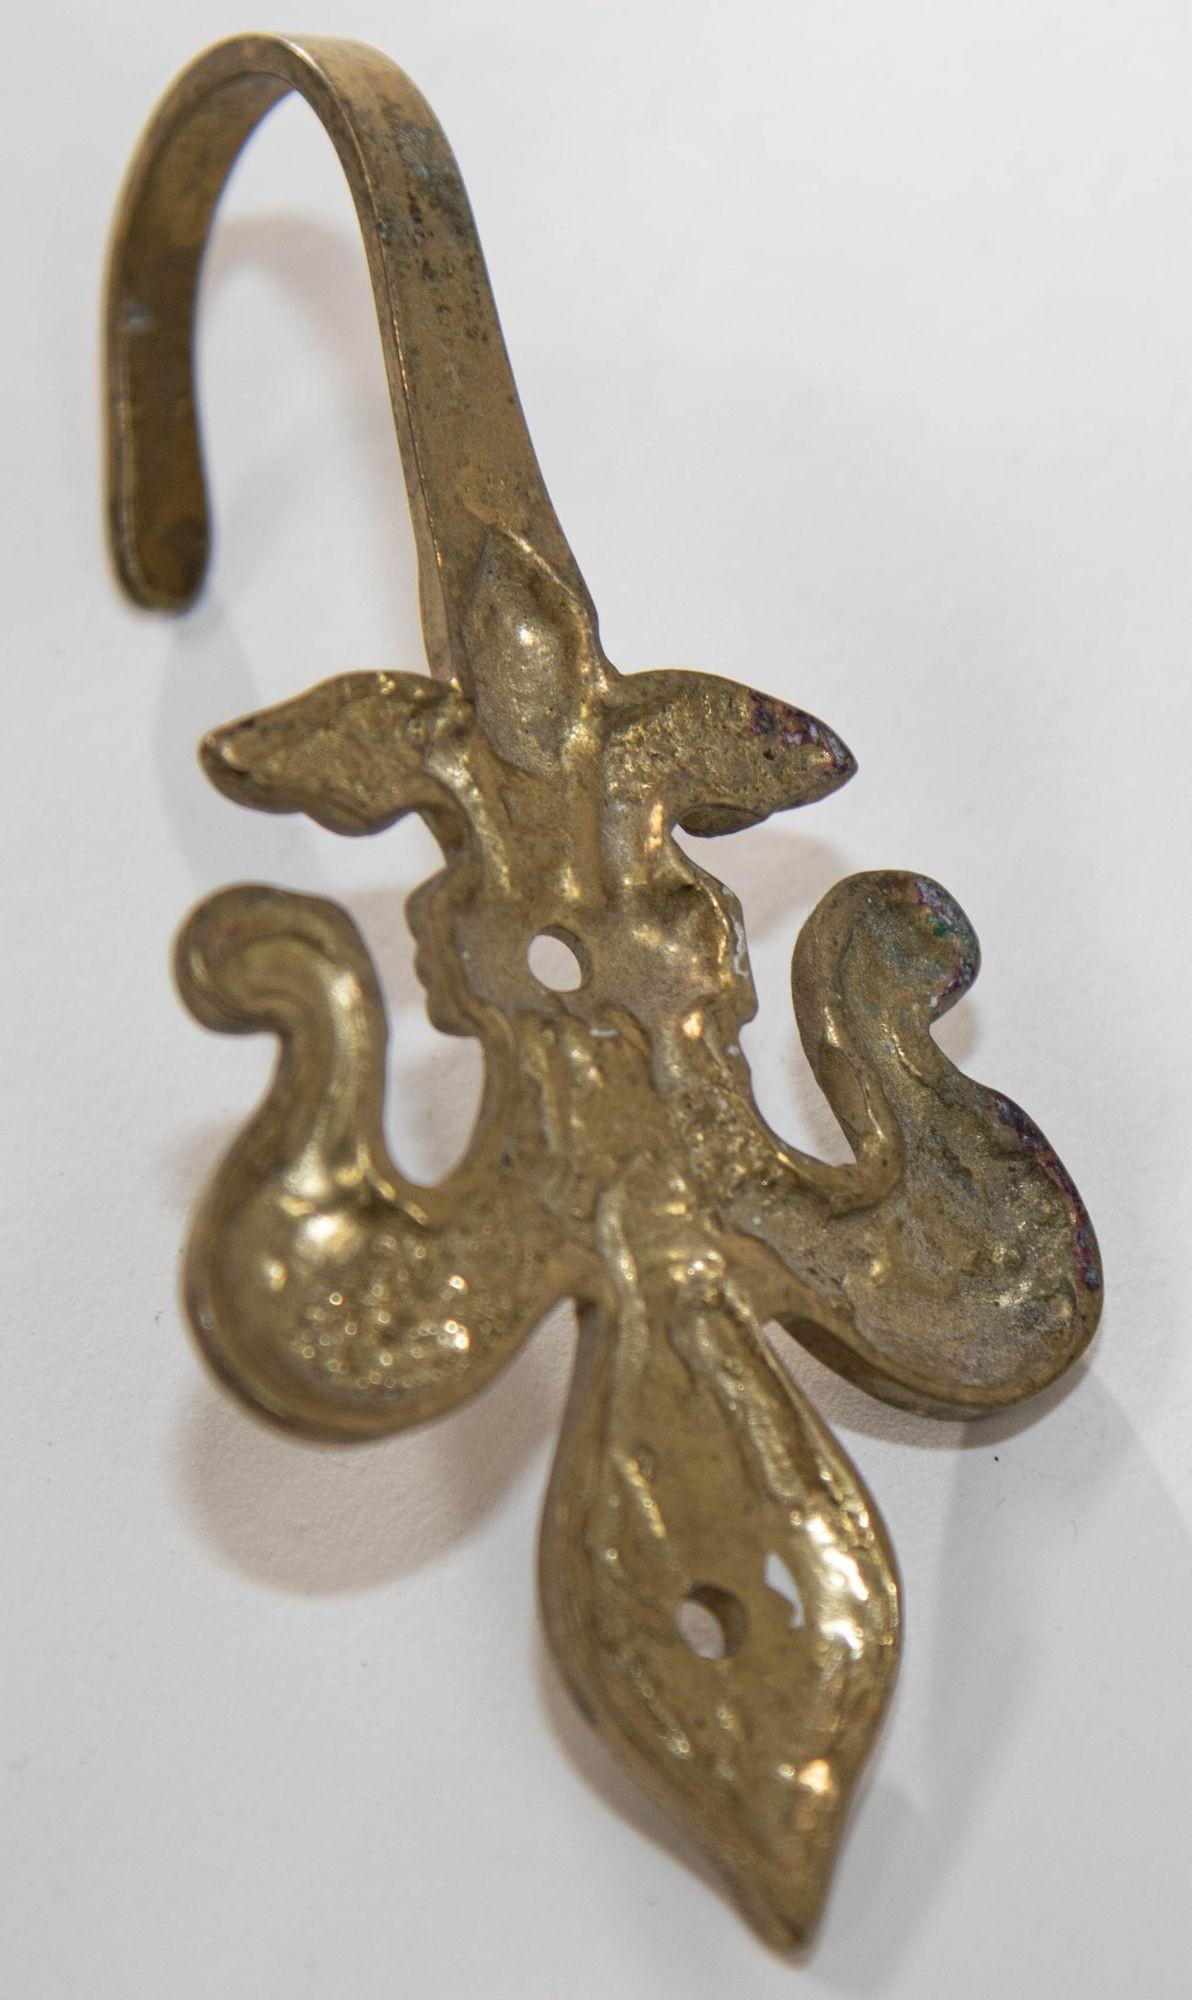 Vintage Brass Fleur De Lis Wall Mount Hook French Fleur De Lys Wall Hook In Good Condition For Sale In North Hollywood, CA